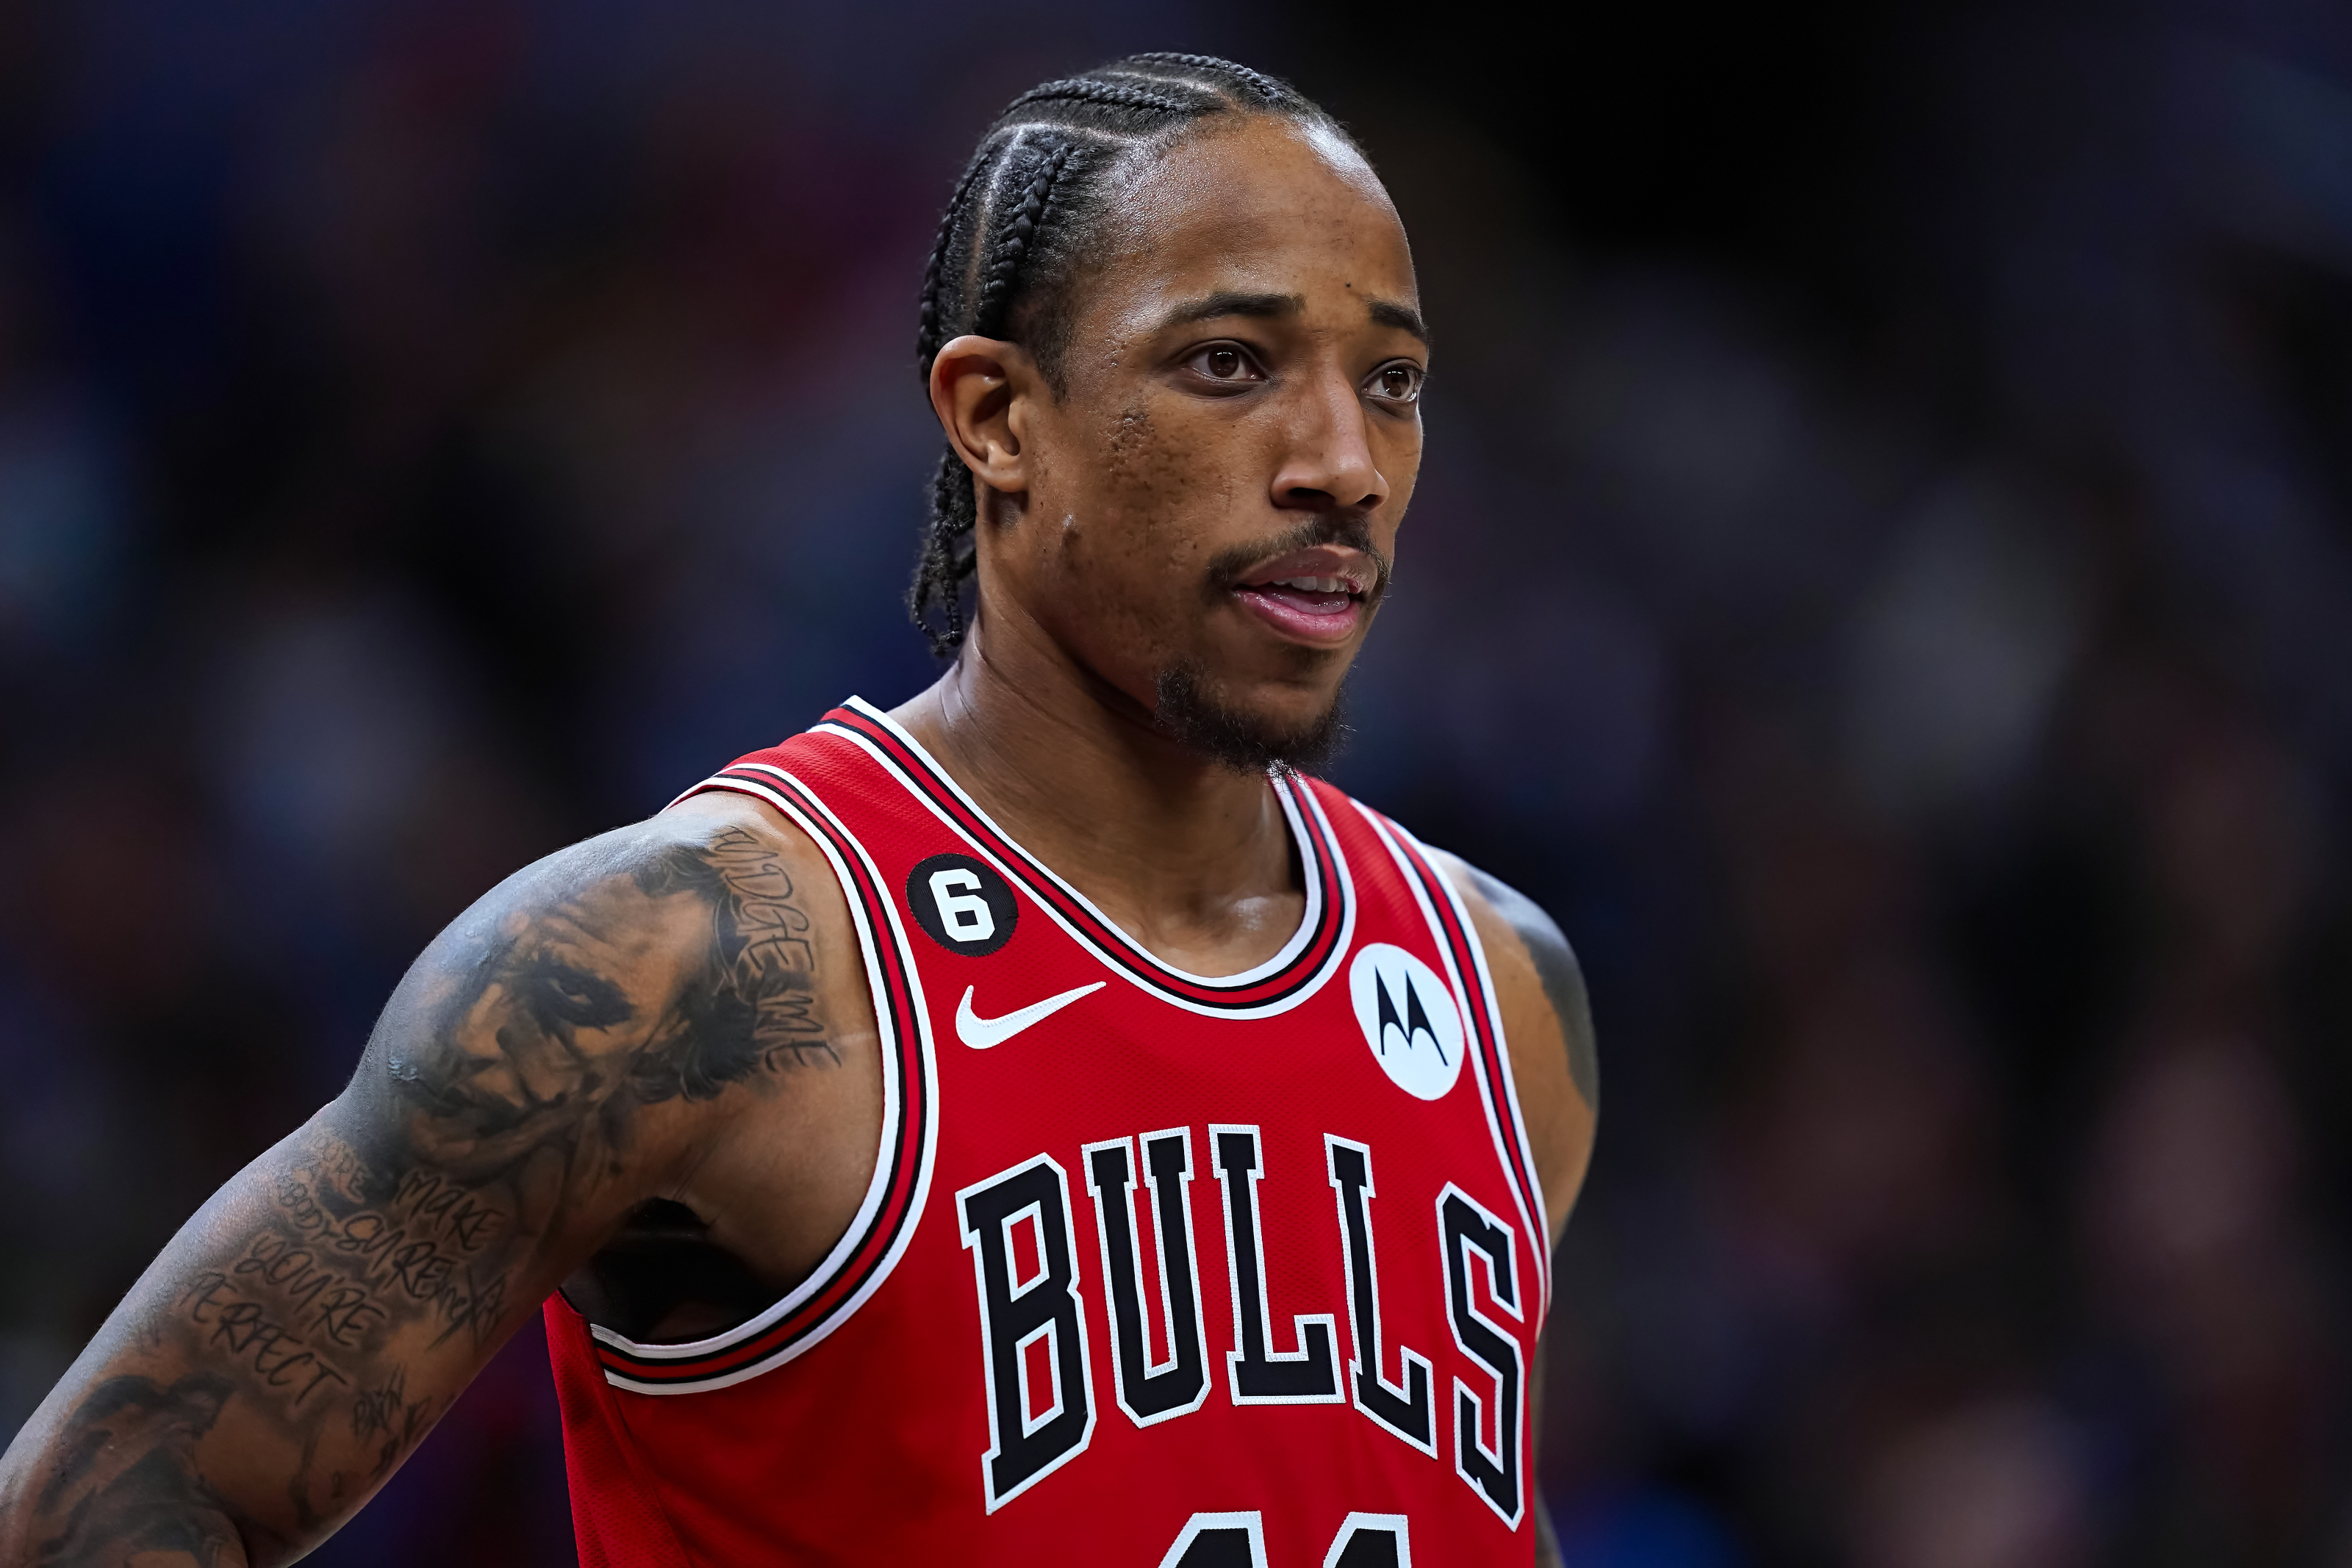 Vote Bulls for 2023 NBA All-Star Game